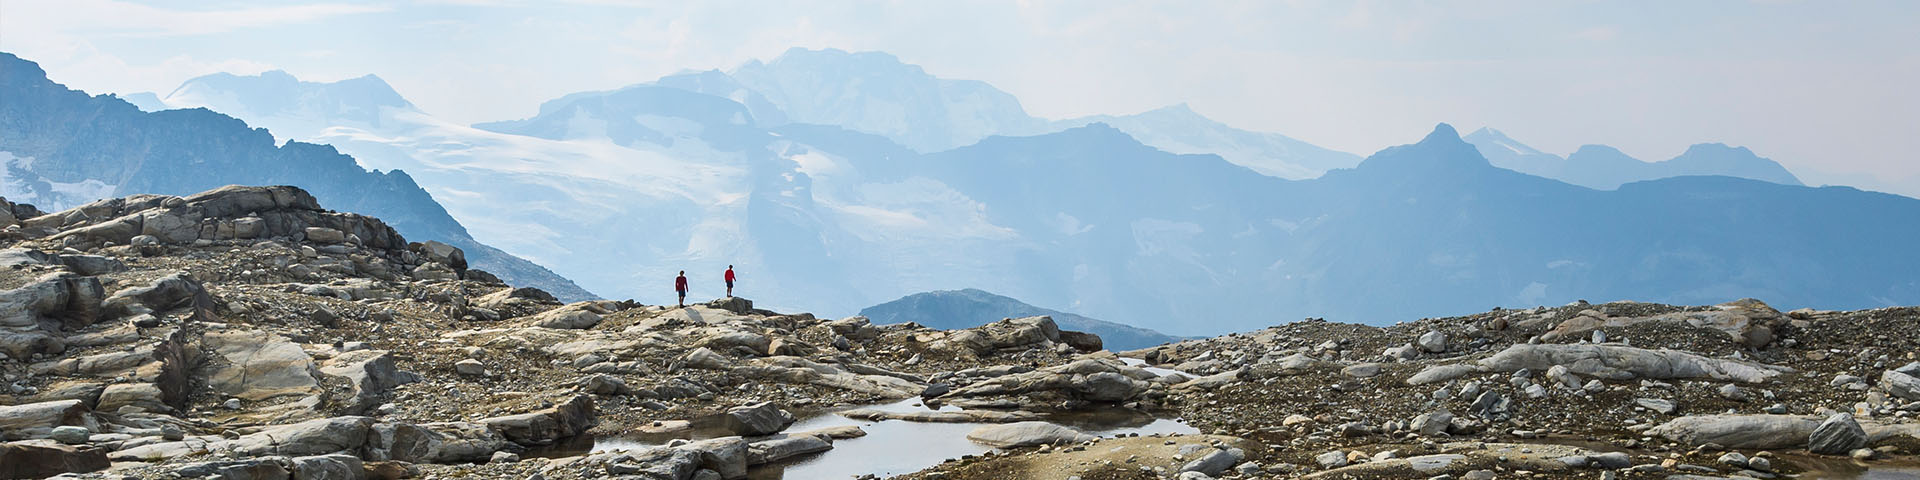 Two hikers high in the alpine